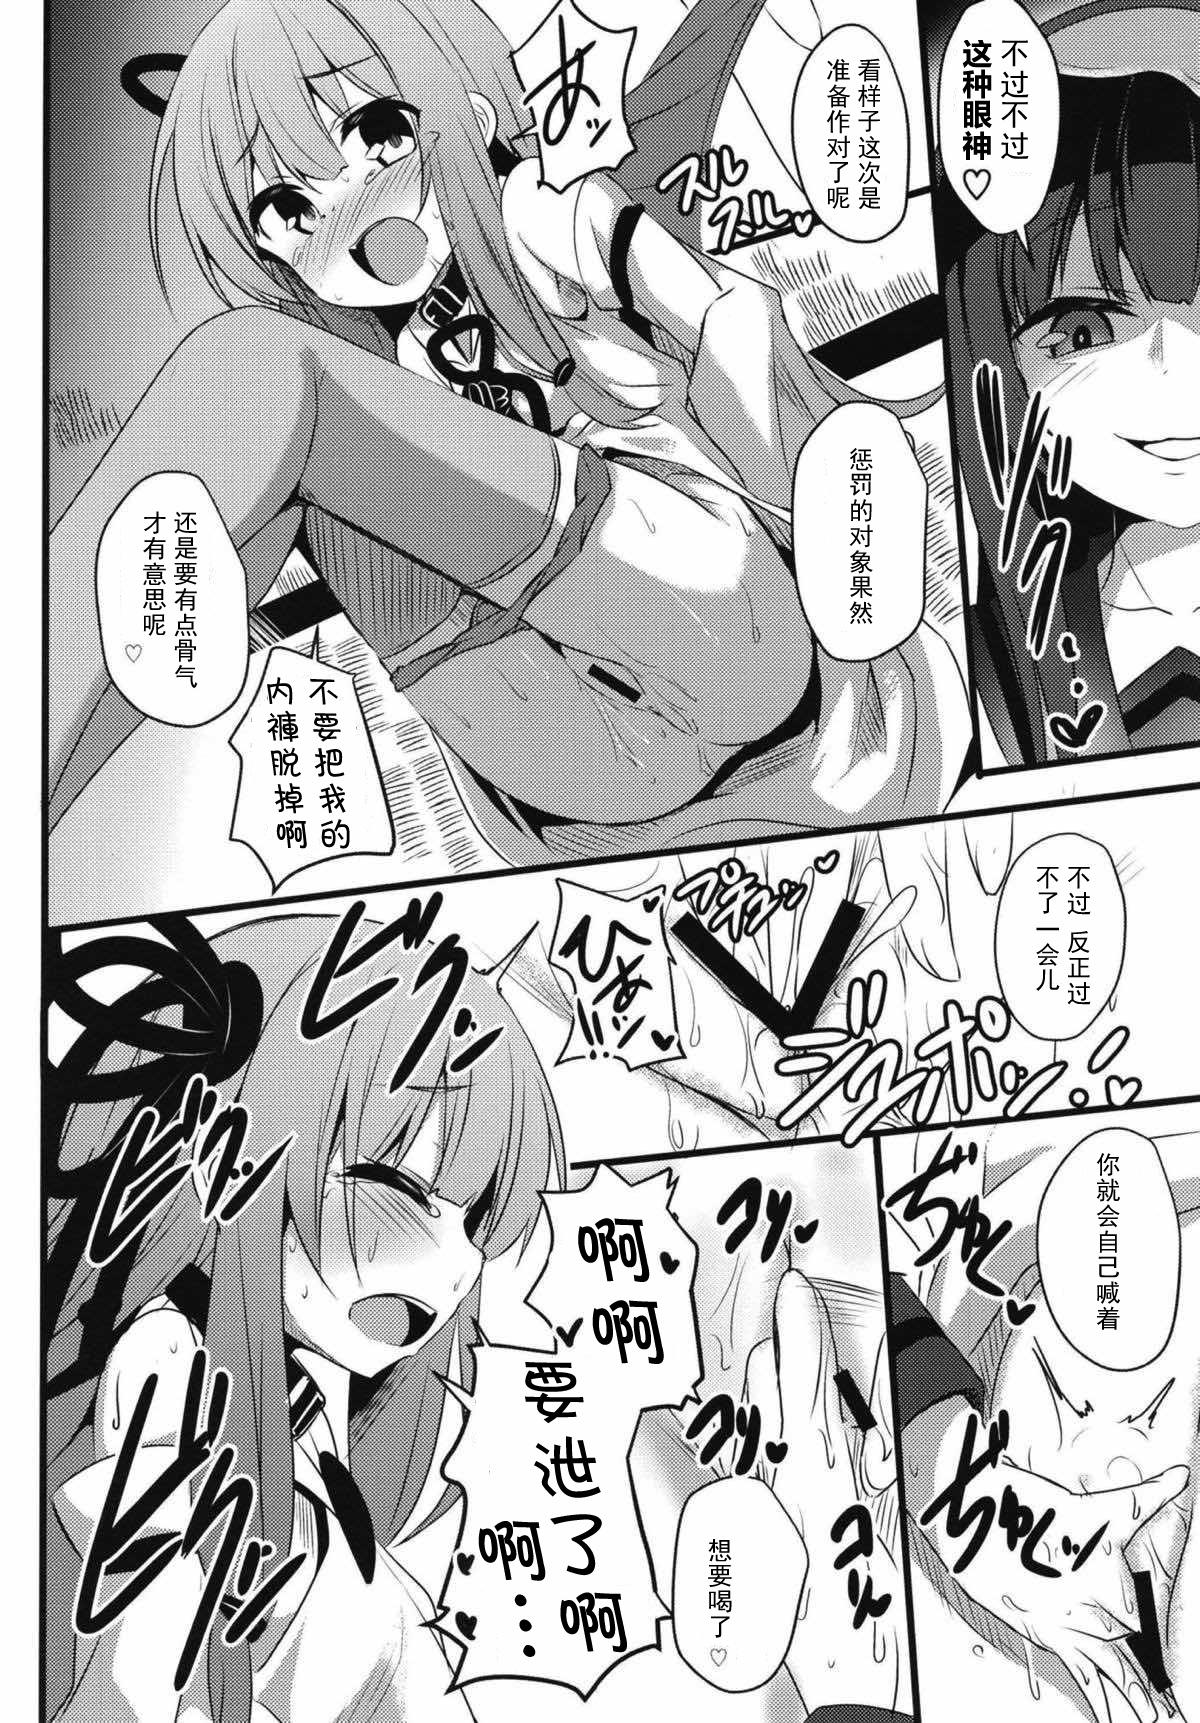 Gapes Gaping Asshole (Kotonoha's Festa 2) [Milk Pudding (Jamcy)] Akane-chan Challenge! 2.5-kaime (VOICEROID) [Chinese] [古早个人汉化] - Voiceroid Dad - Page 12